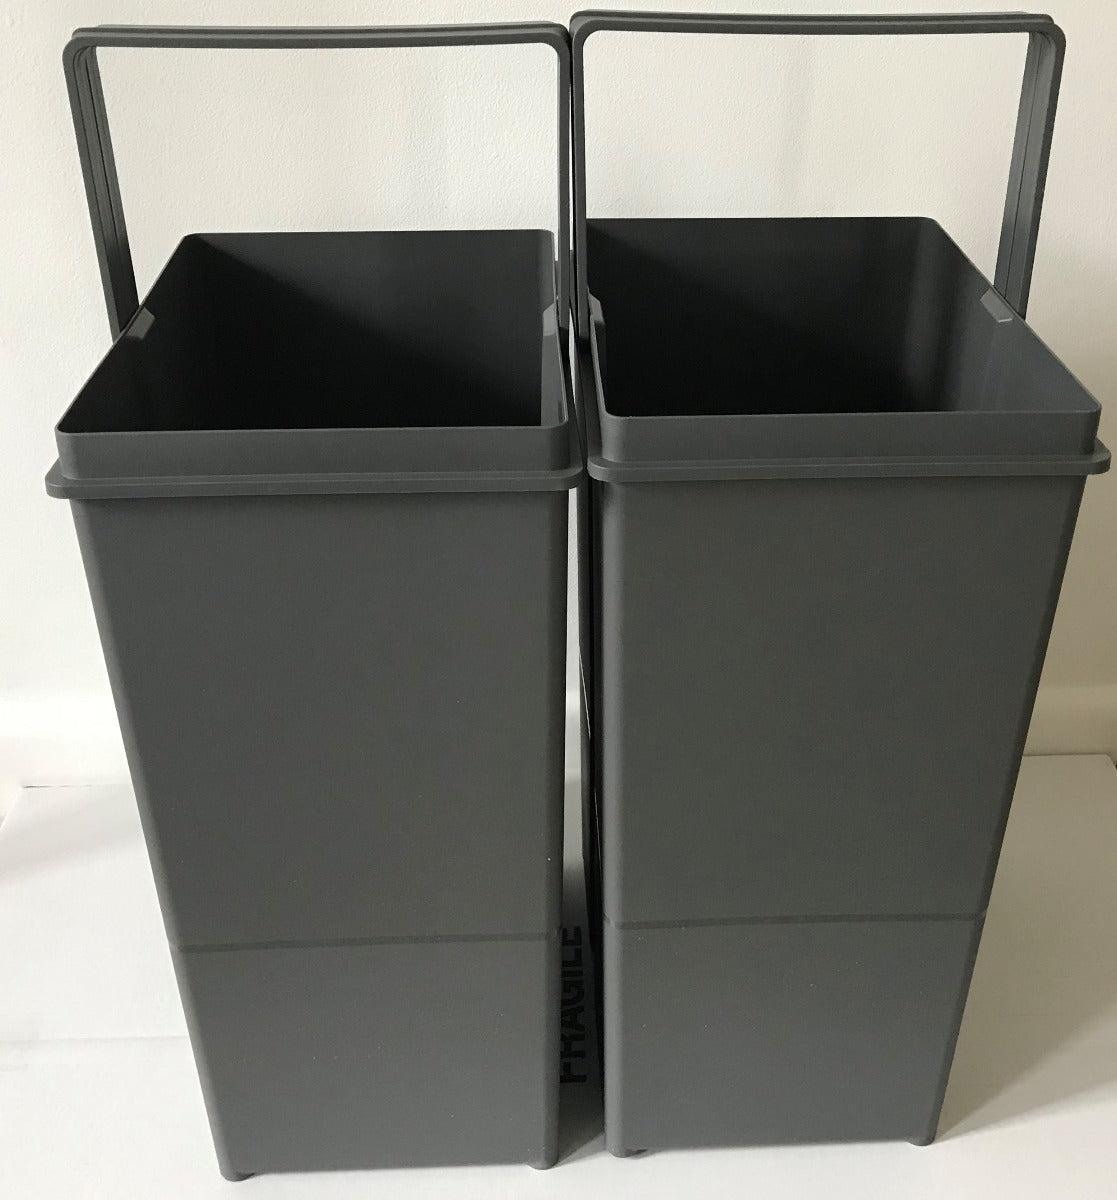 The two smart dark grey buckets have a 29L capacity and have handles for easy removal